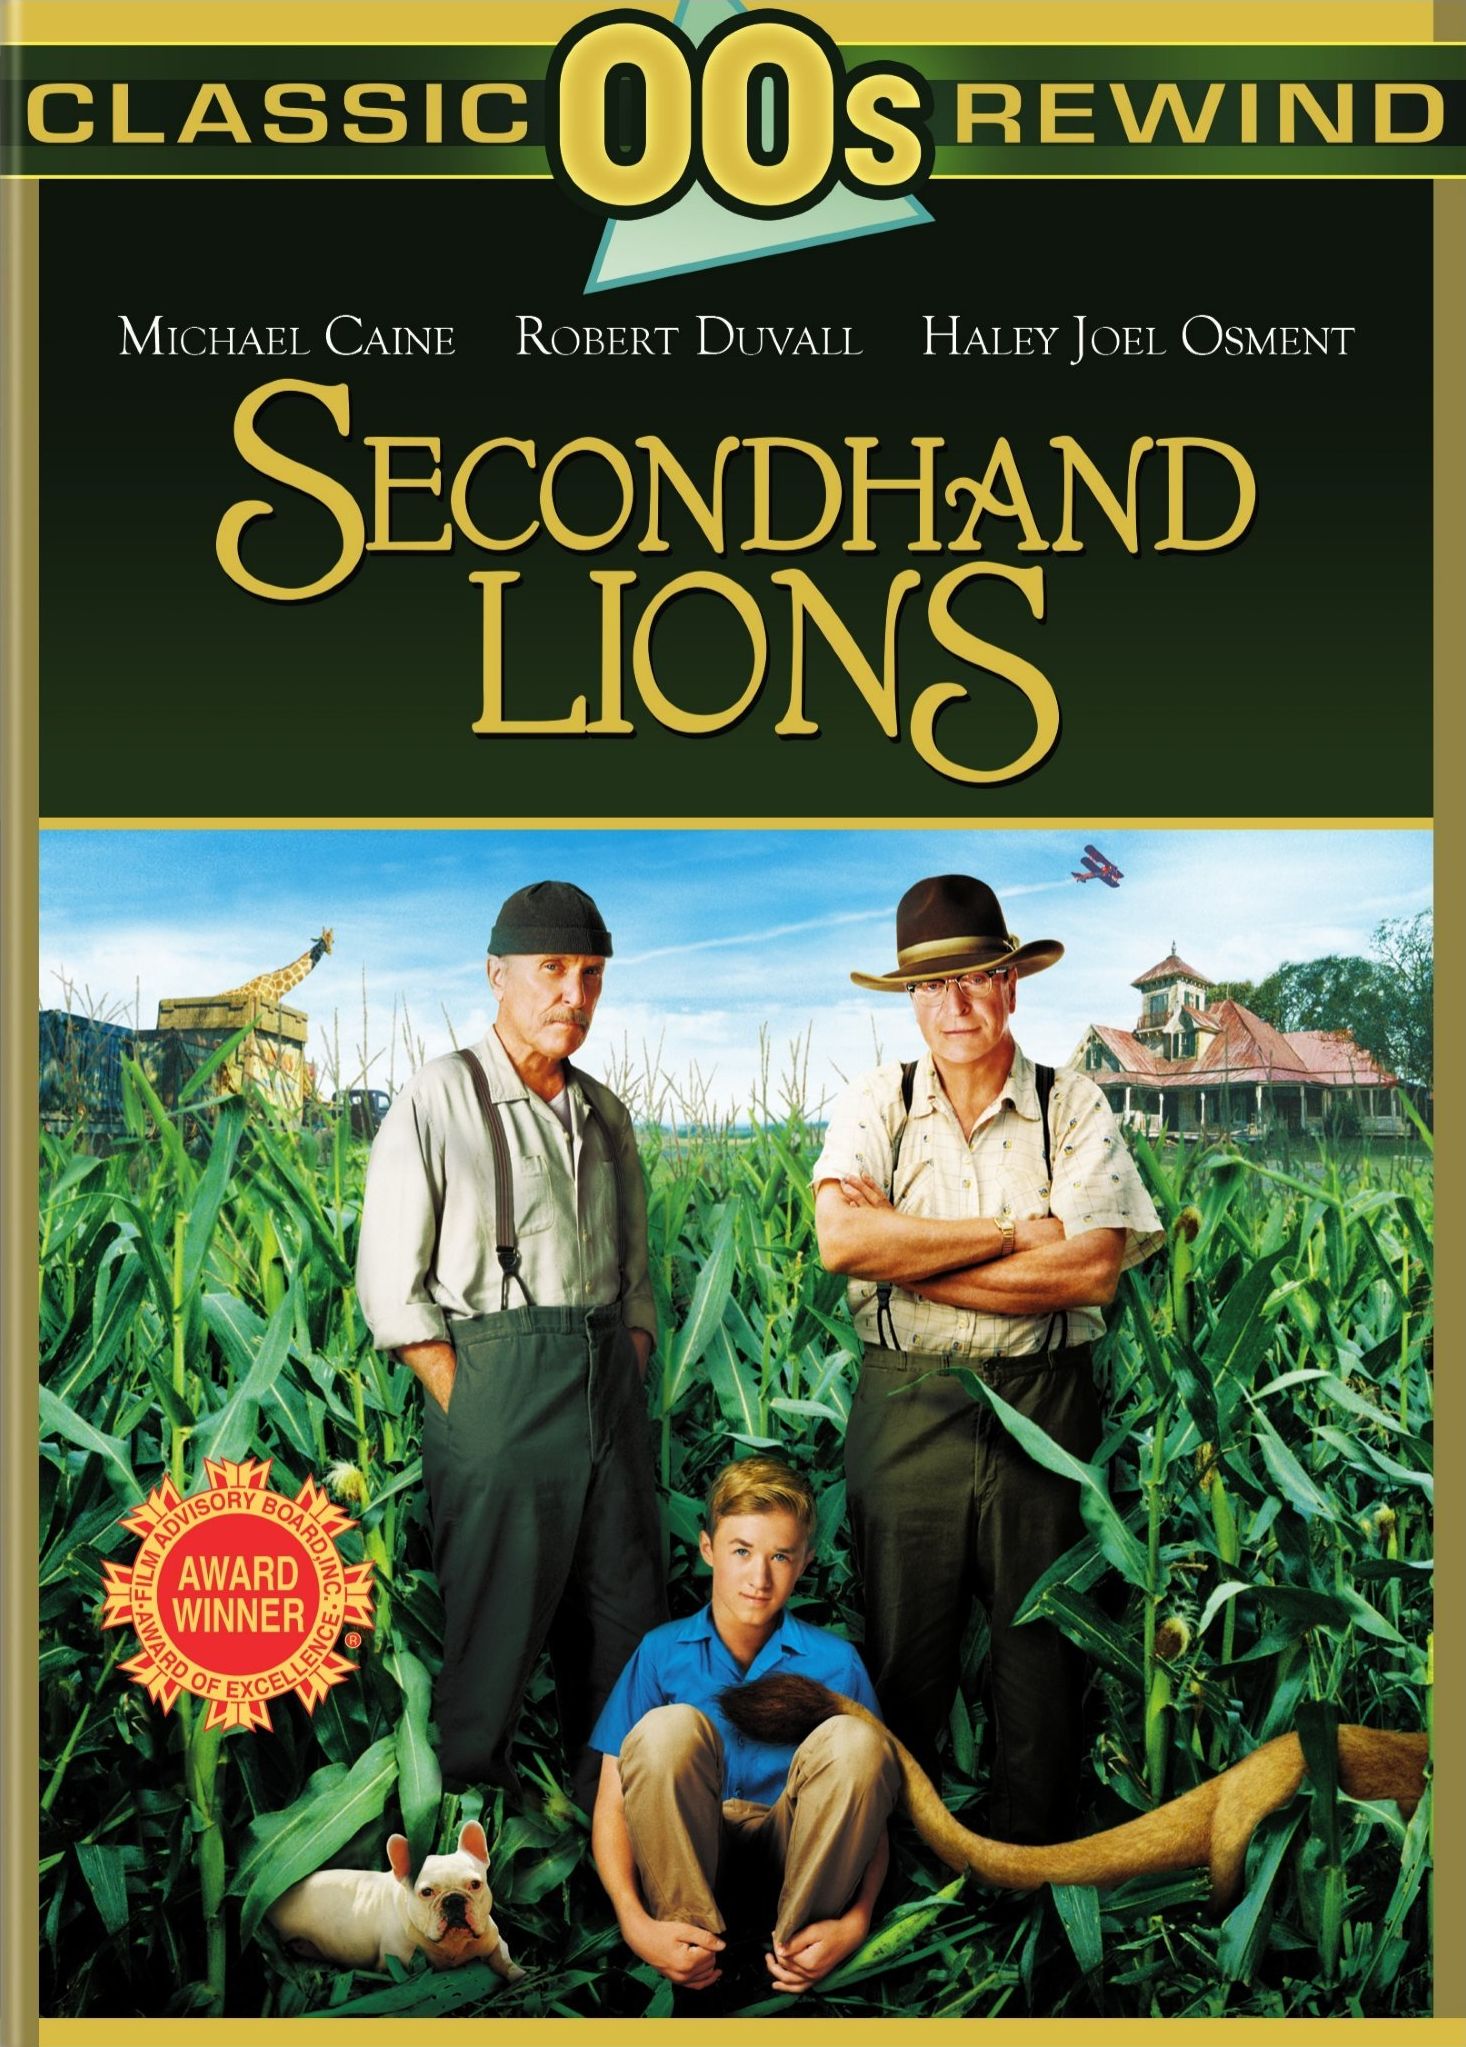 Secondhand Lions DVD Release Date February 3, 2004